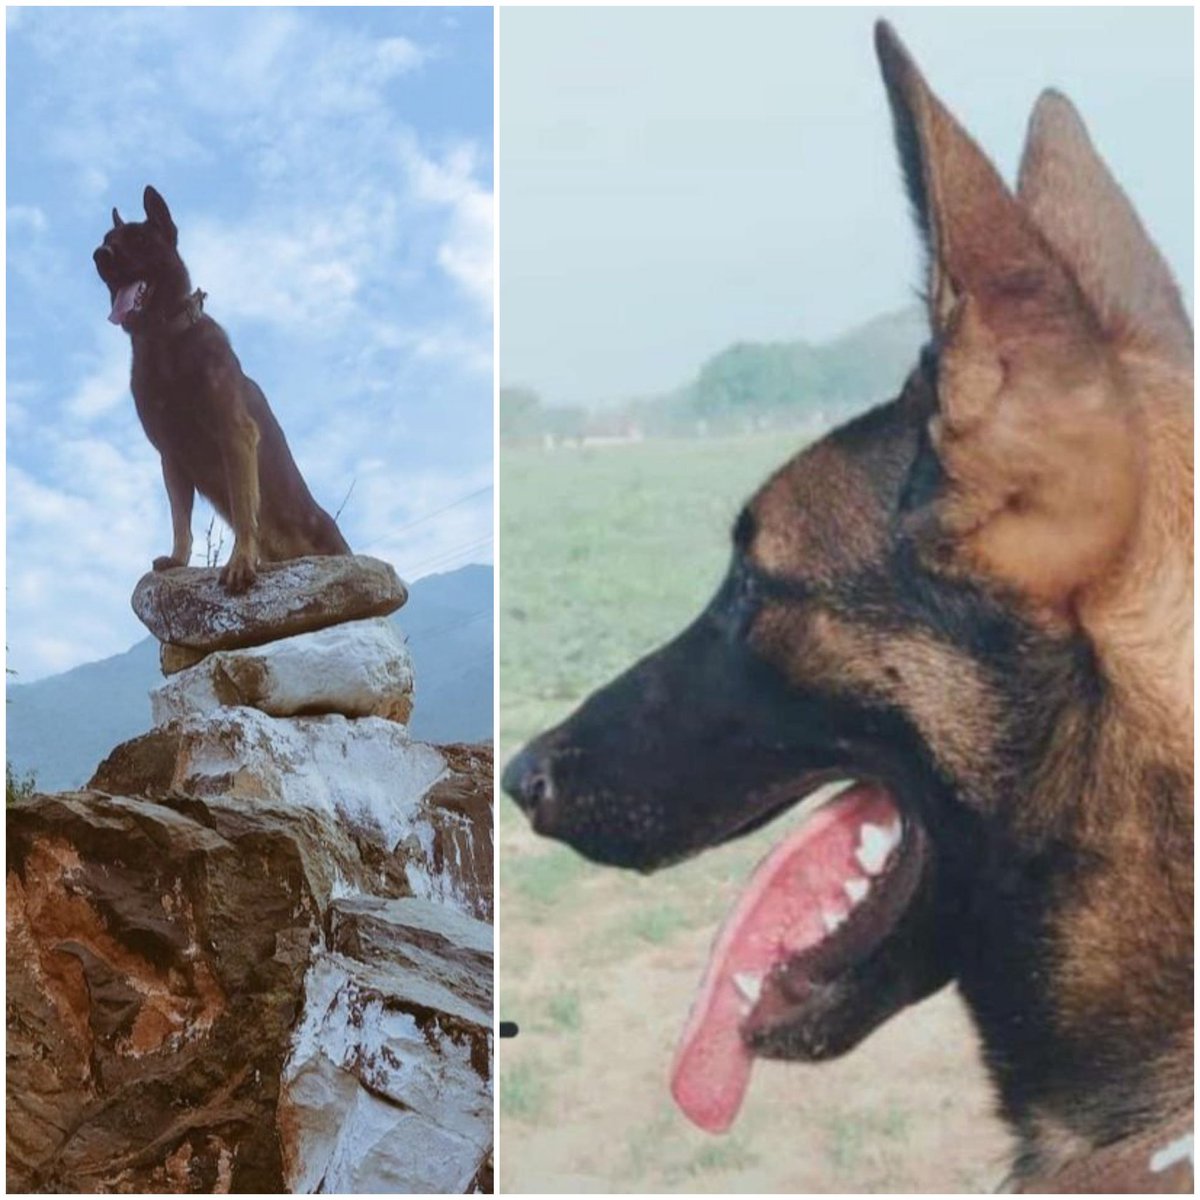 Kent KIA today, took bullets shielding her handler during an anti-terror op in Rajouri. Joins the likes of Zoom & Axel who also fought honourably & made the ultimate sacrifice fighting alongside soldiers in Kashmir last year. Both were mentioned in dispatches. Hope Kent is too.